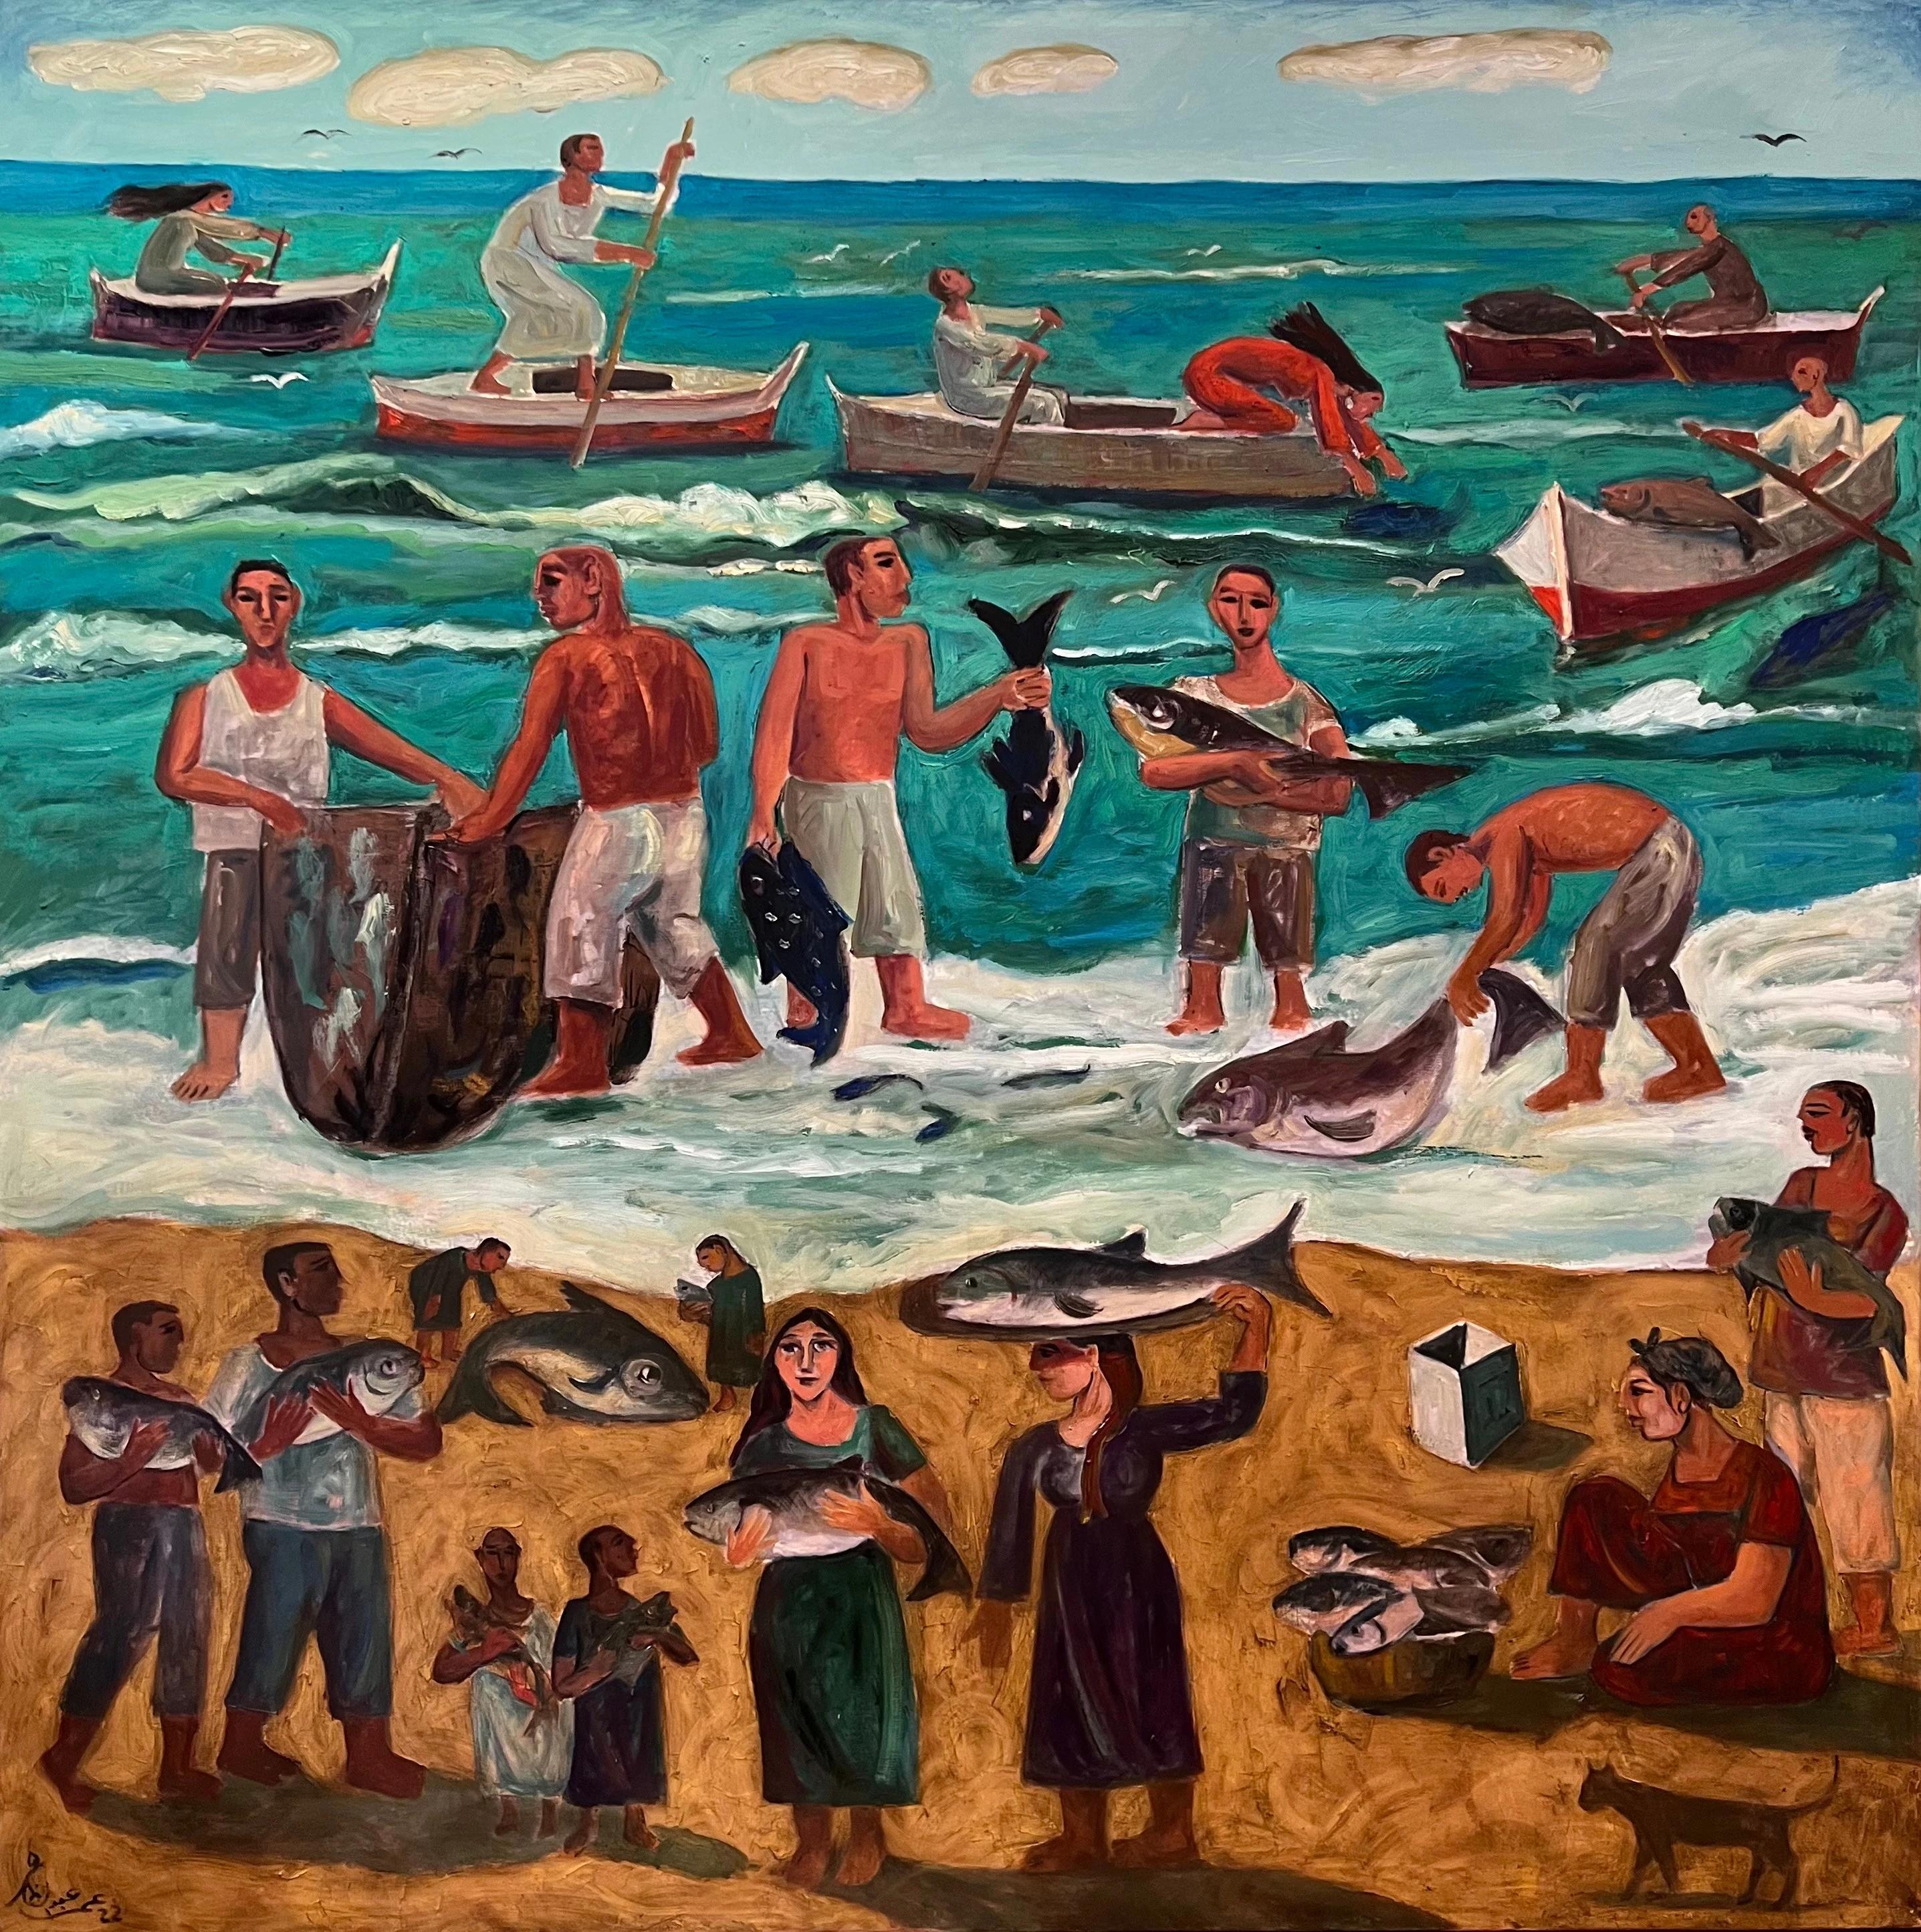 "Ocean's Bounty" Oil painting 59" x 59" inch by Omar Abdel Zaher

Abdel Zaher is a graduate of the Academy of Fine Arts in Helwan and has been painting for three decades and has notably featured in a variety of collective exhibitions, including